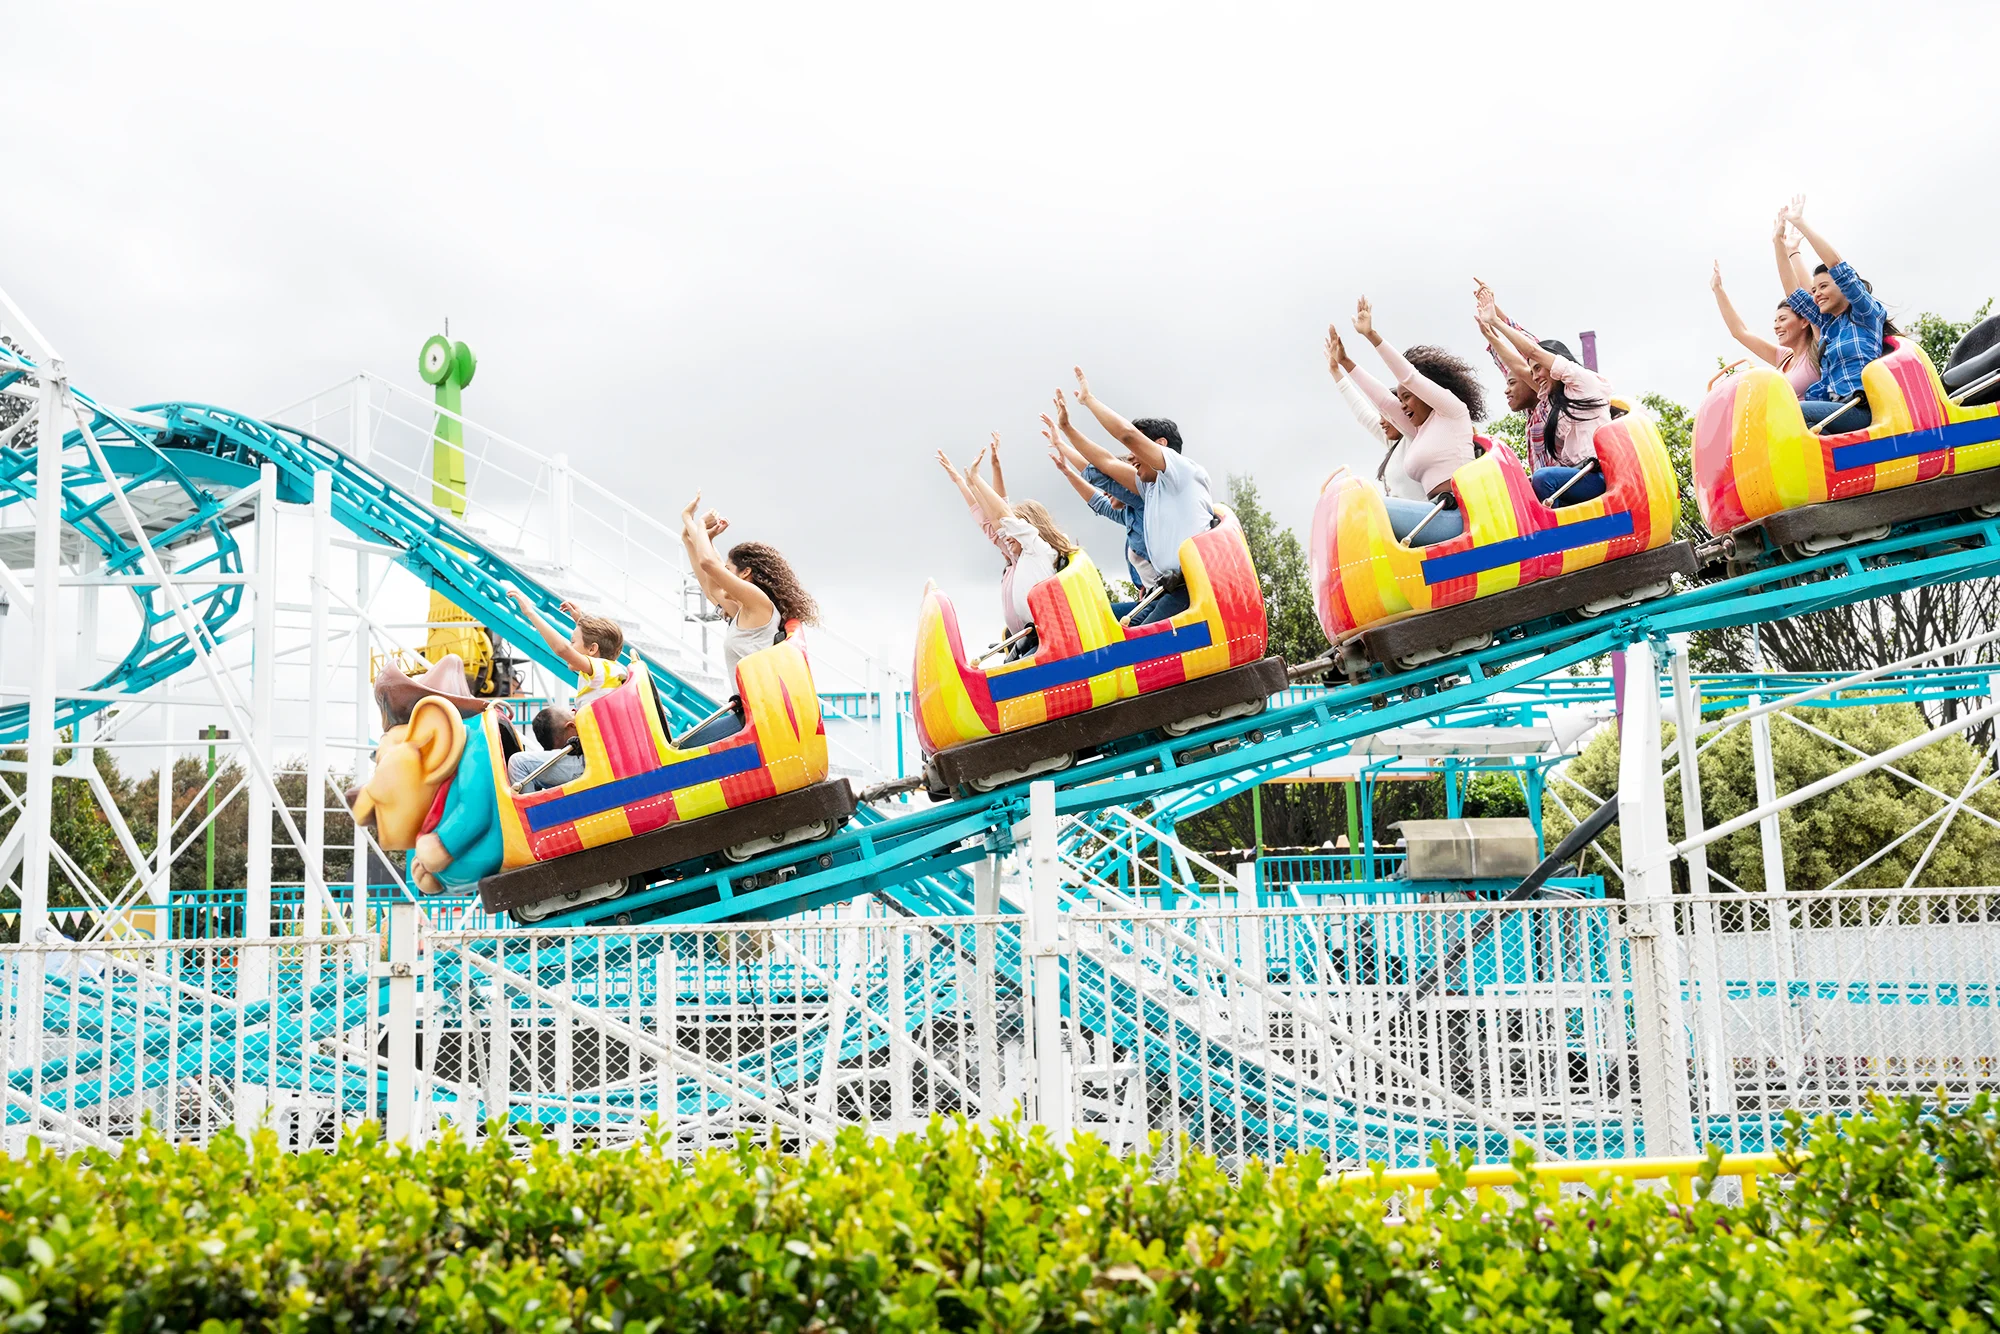 A side view of a group of people riding a roller coaster with their arms in the air